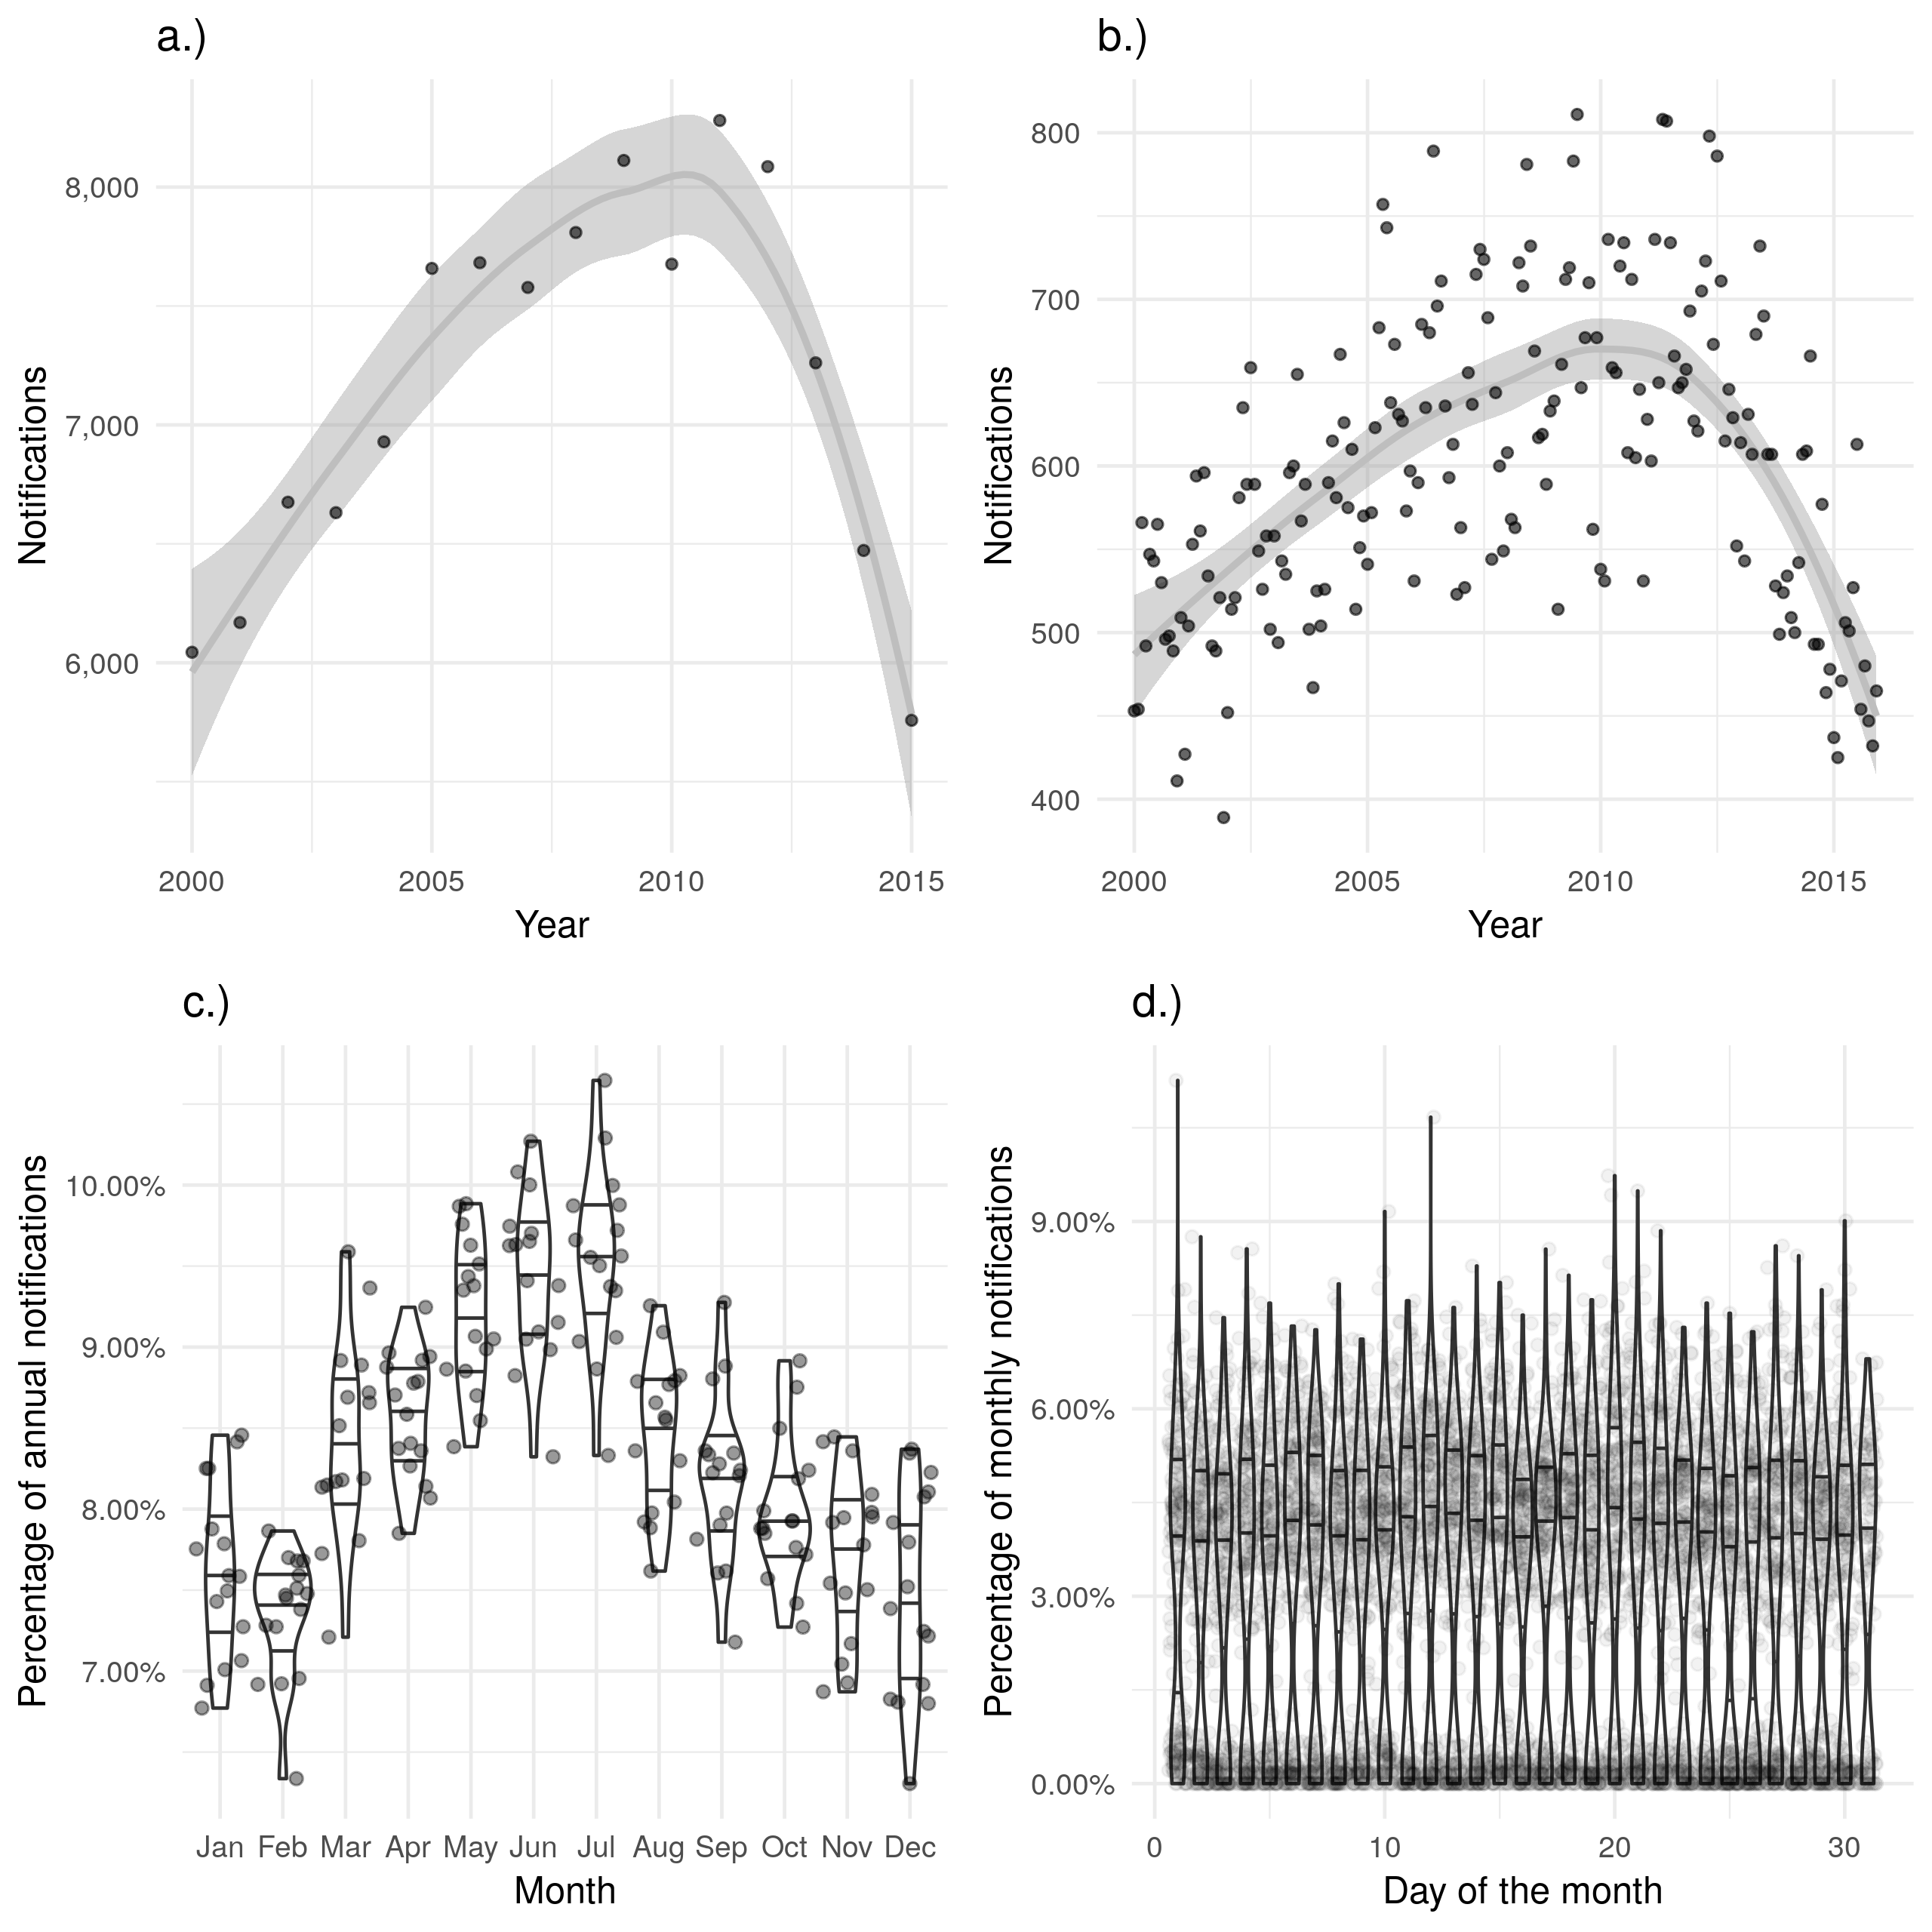 a.) and b.) show notifications over time by date of notification in the ETS, with a.) aggregated by year and  b.) aggregated by month. A trendline has been produced using a locally weighted regression model. Both of these plots show the same overall trend, but b.) contains a large amount of apparent noise. c.) Shows the proportion of cases notified in a given month for each year, with some evidence of a seasonal trend. d.) Shows the proportion of cases notified on a given day for each month, there is little evidence of between day variation in cases notified.